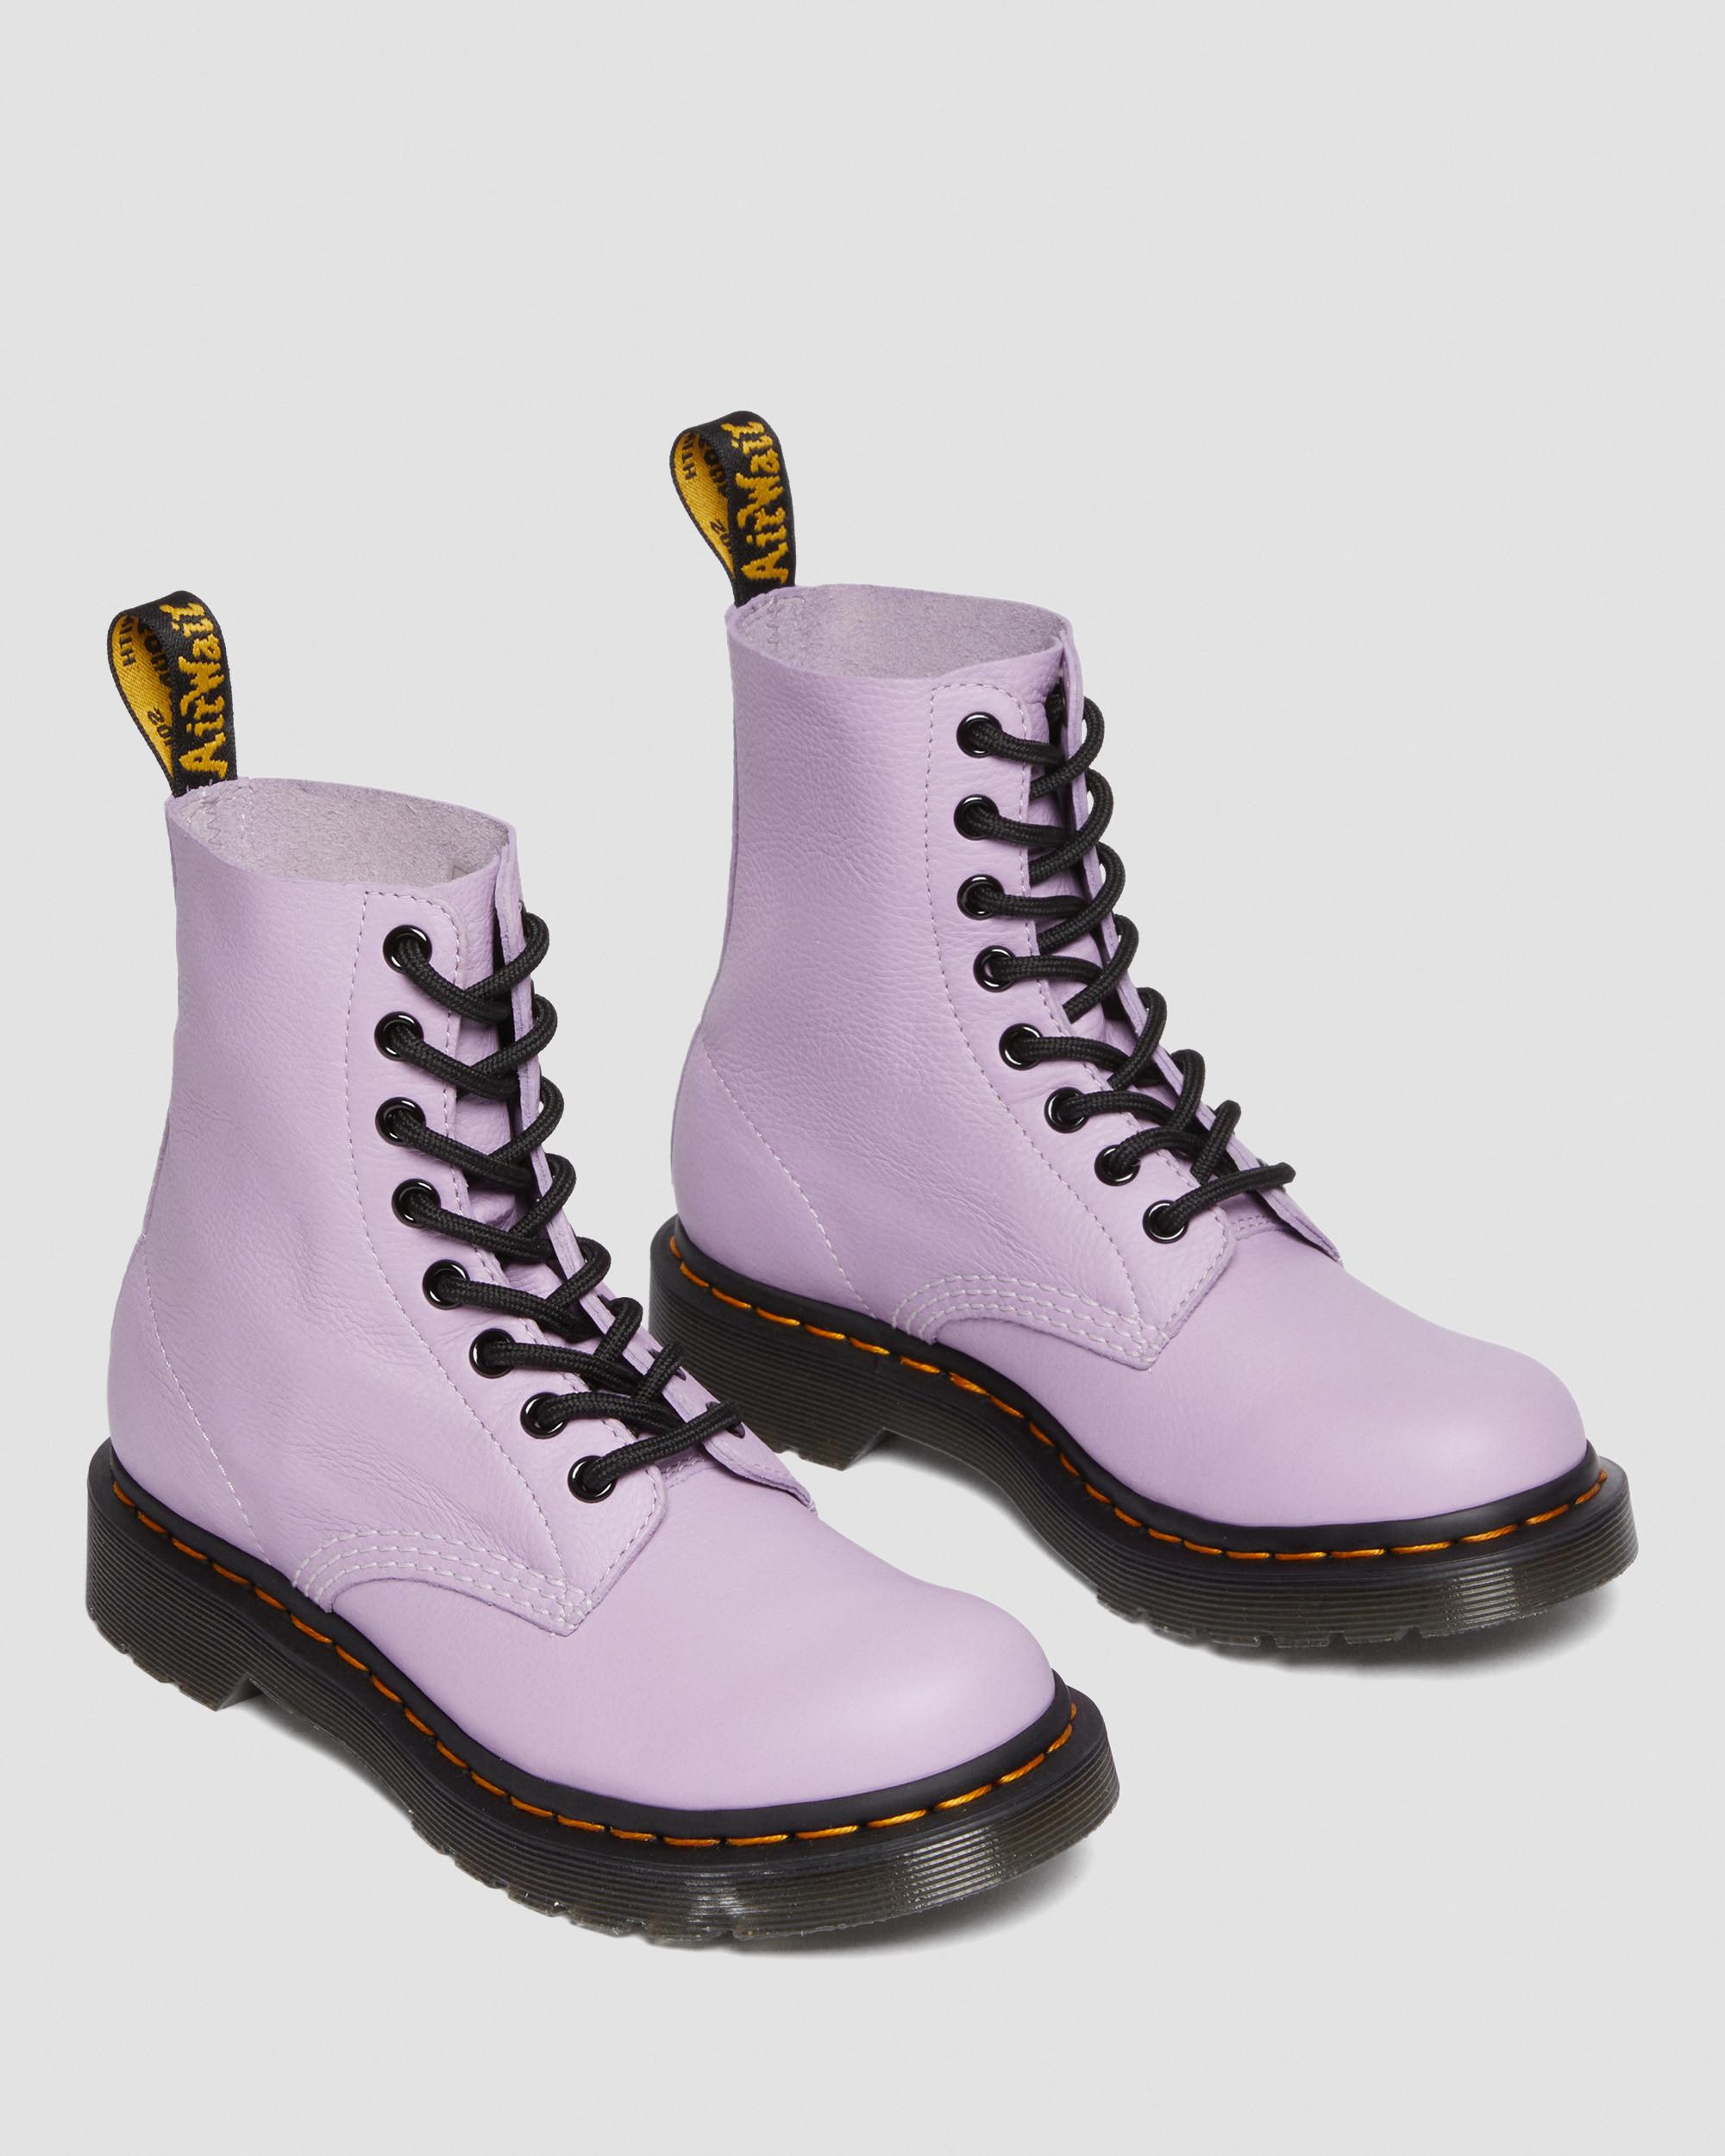 1460 Women\'s Pascal Black Up | Boots Eyelet Lilac Dr. Lace Martens in